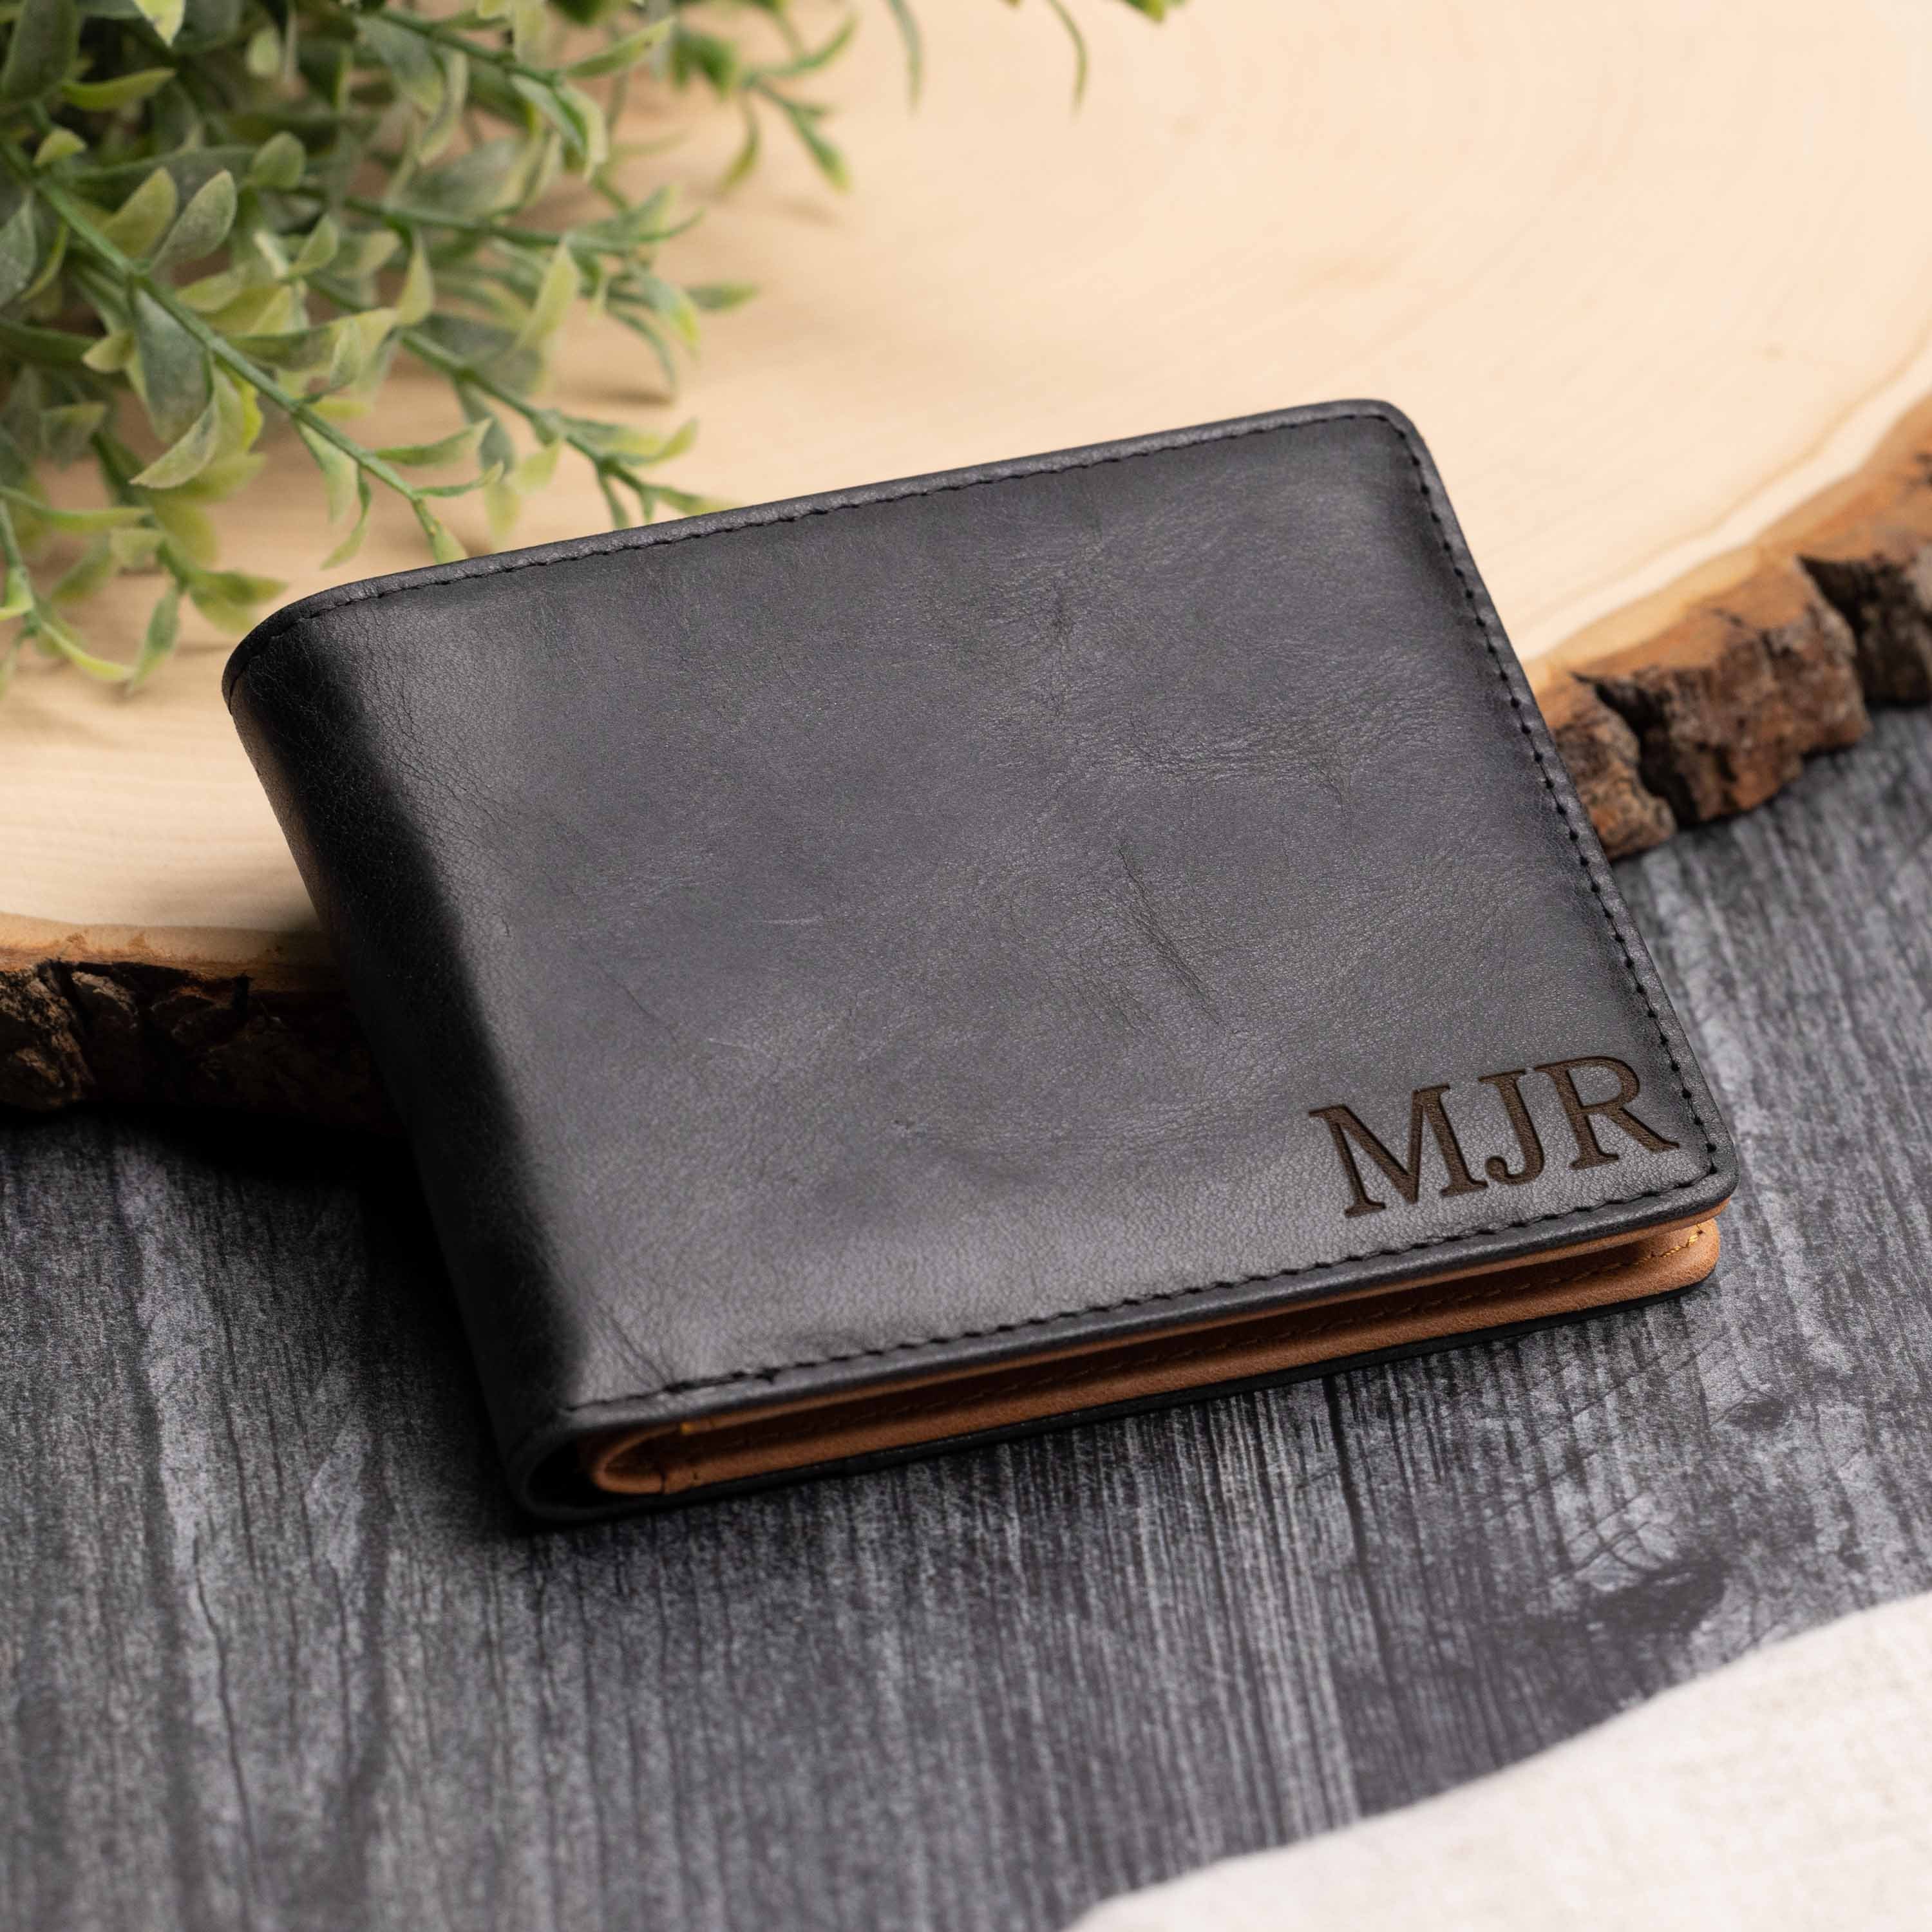 Leather Black Men's Trifold Quick Card Access Wallet/ Top Grain Leather Men Small Card Holder/ Money Clip Wallet/ Gift for Him Birthday Tassen & portemonnees Portemonnees & Geldclips Portemonnees 